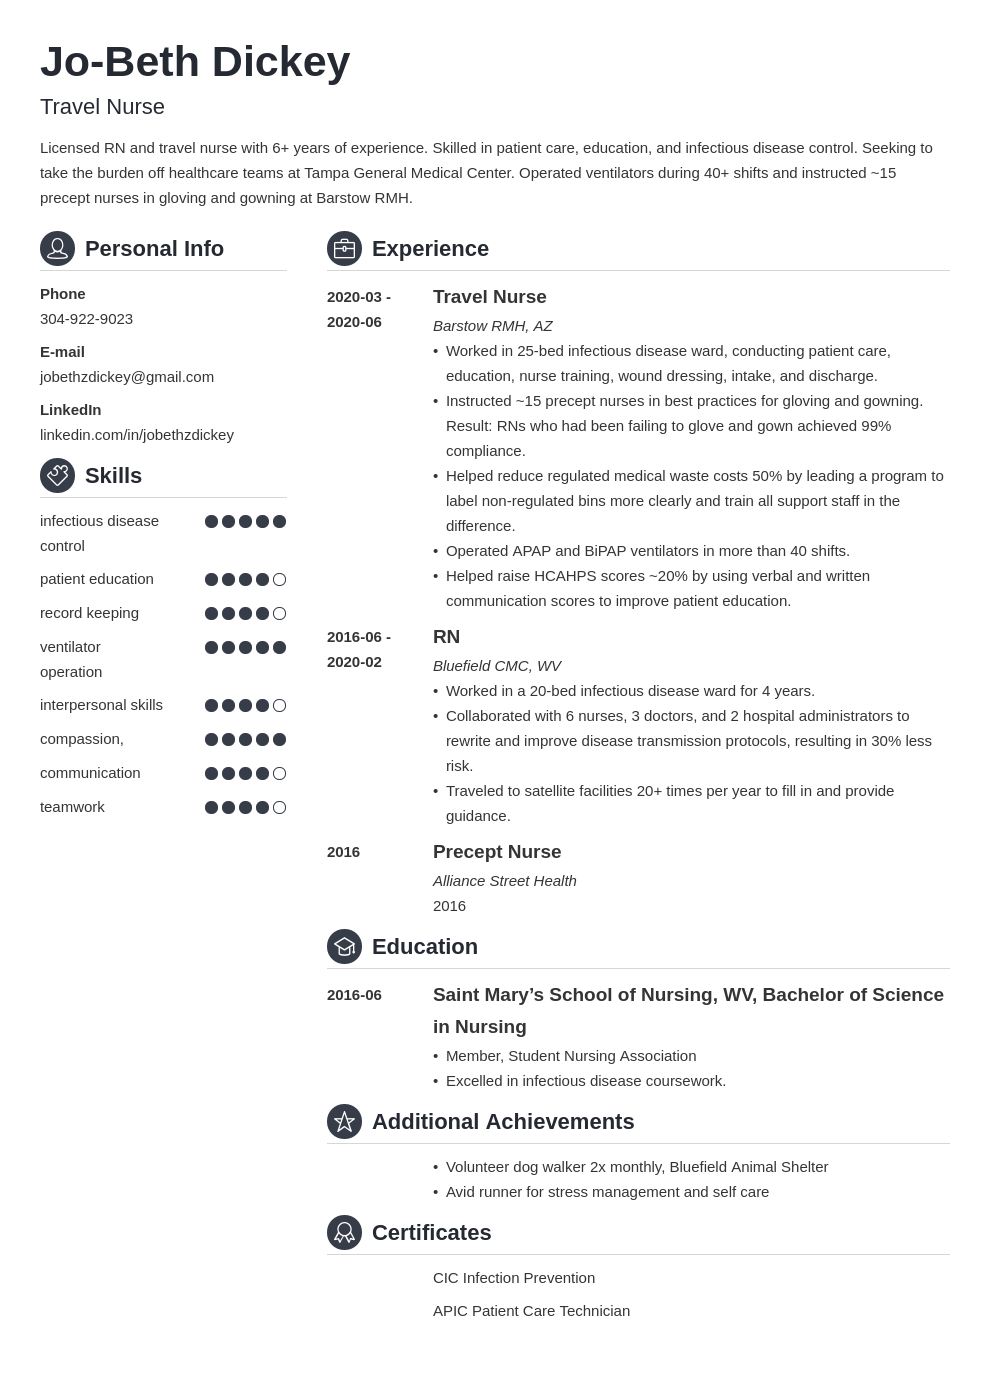 Travel Nurse Resume: Examples and Guide 10  Tips